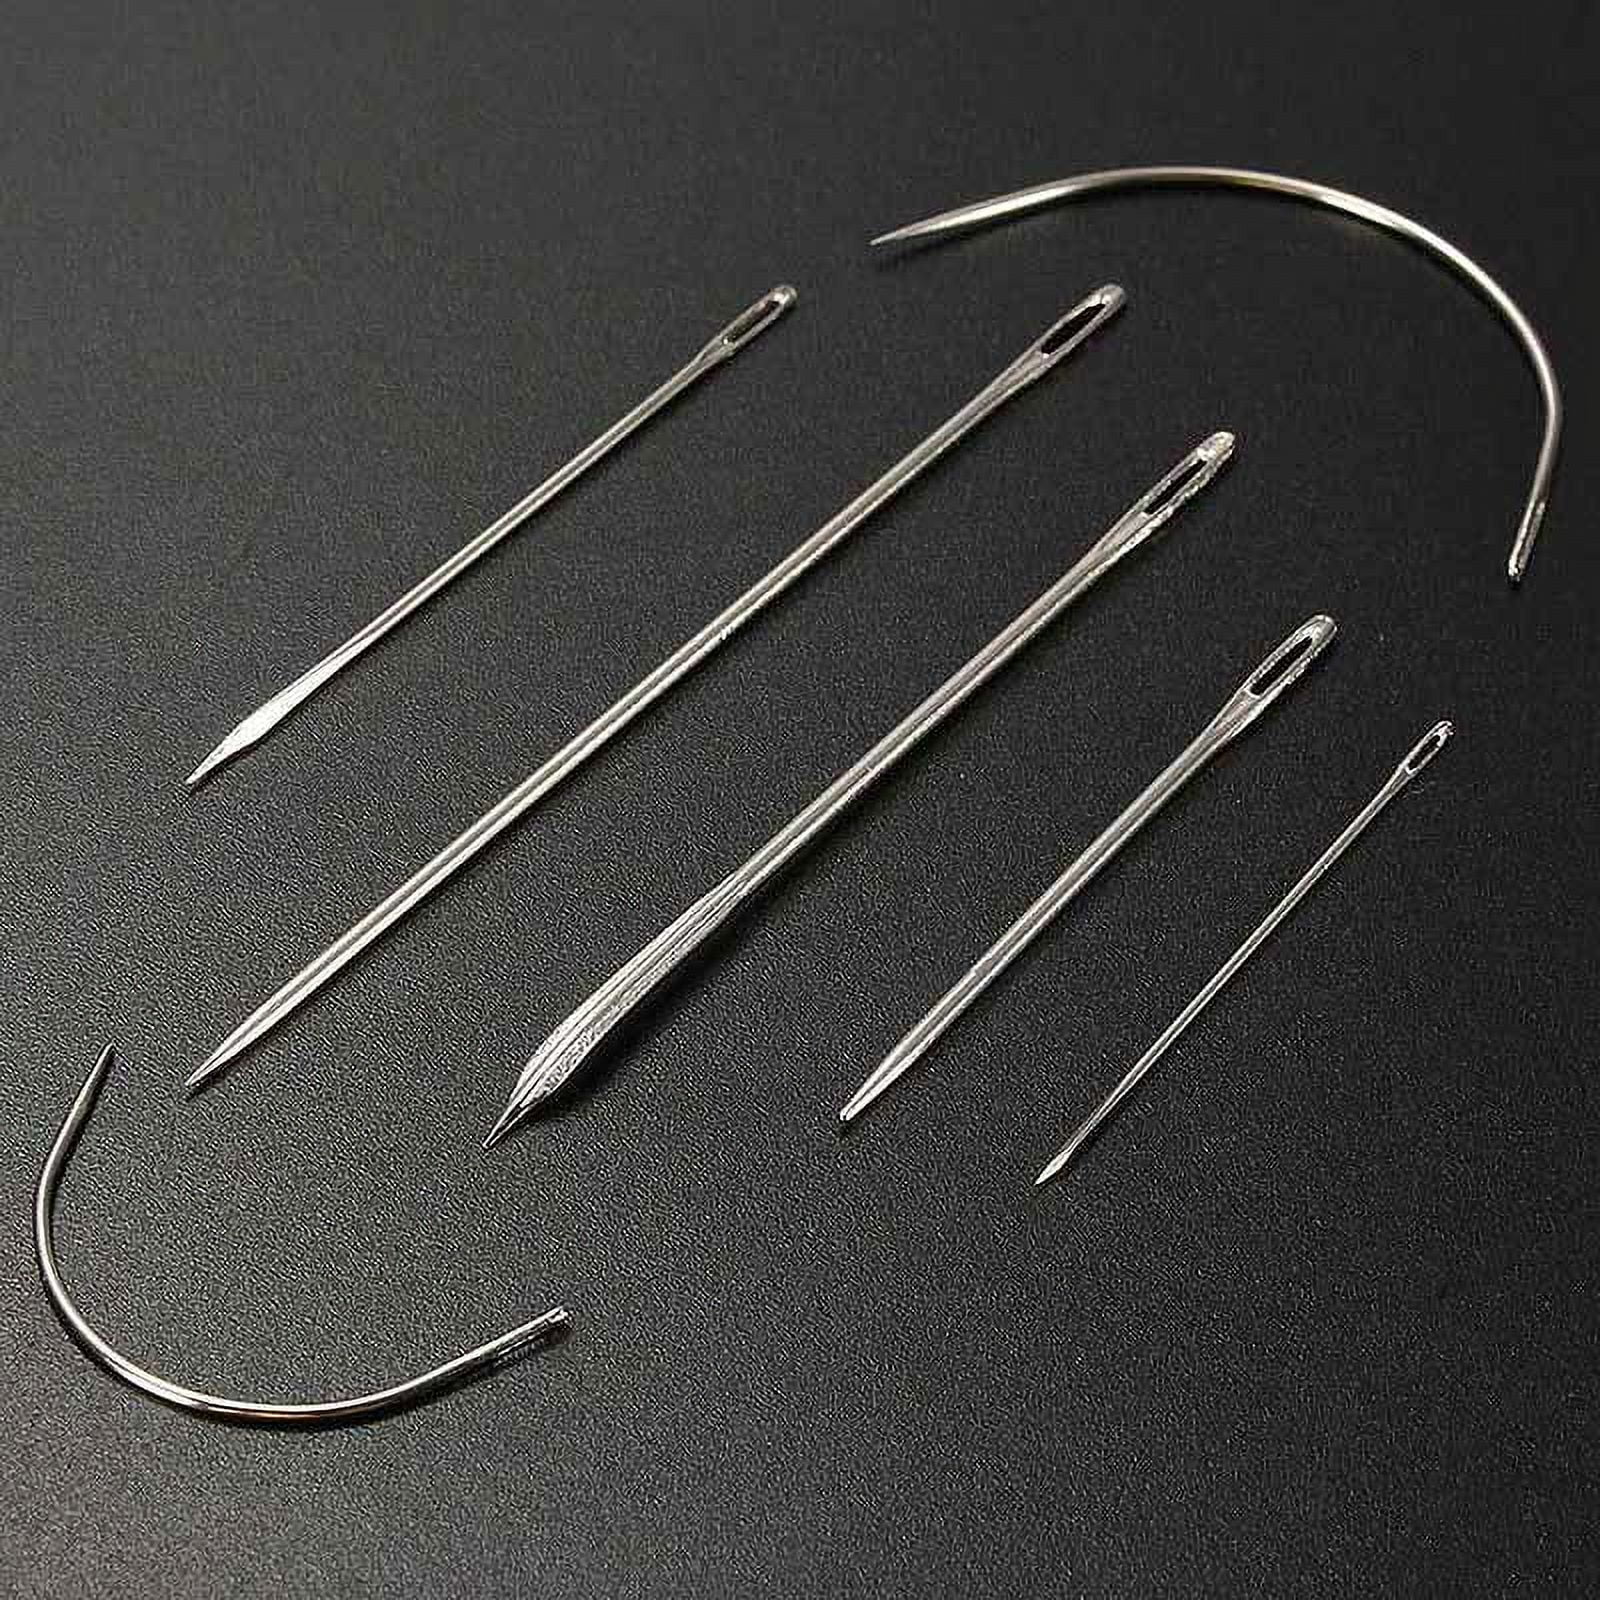 Stamens Curved Needle,7Pcs Upholstery Carpet Leather Canvas Repair Curved  Hand Sewing Needles Kit 